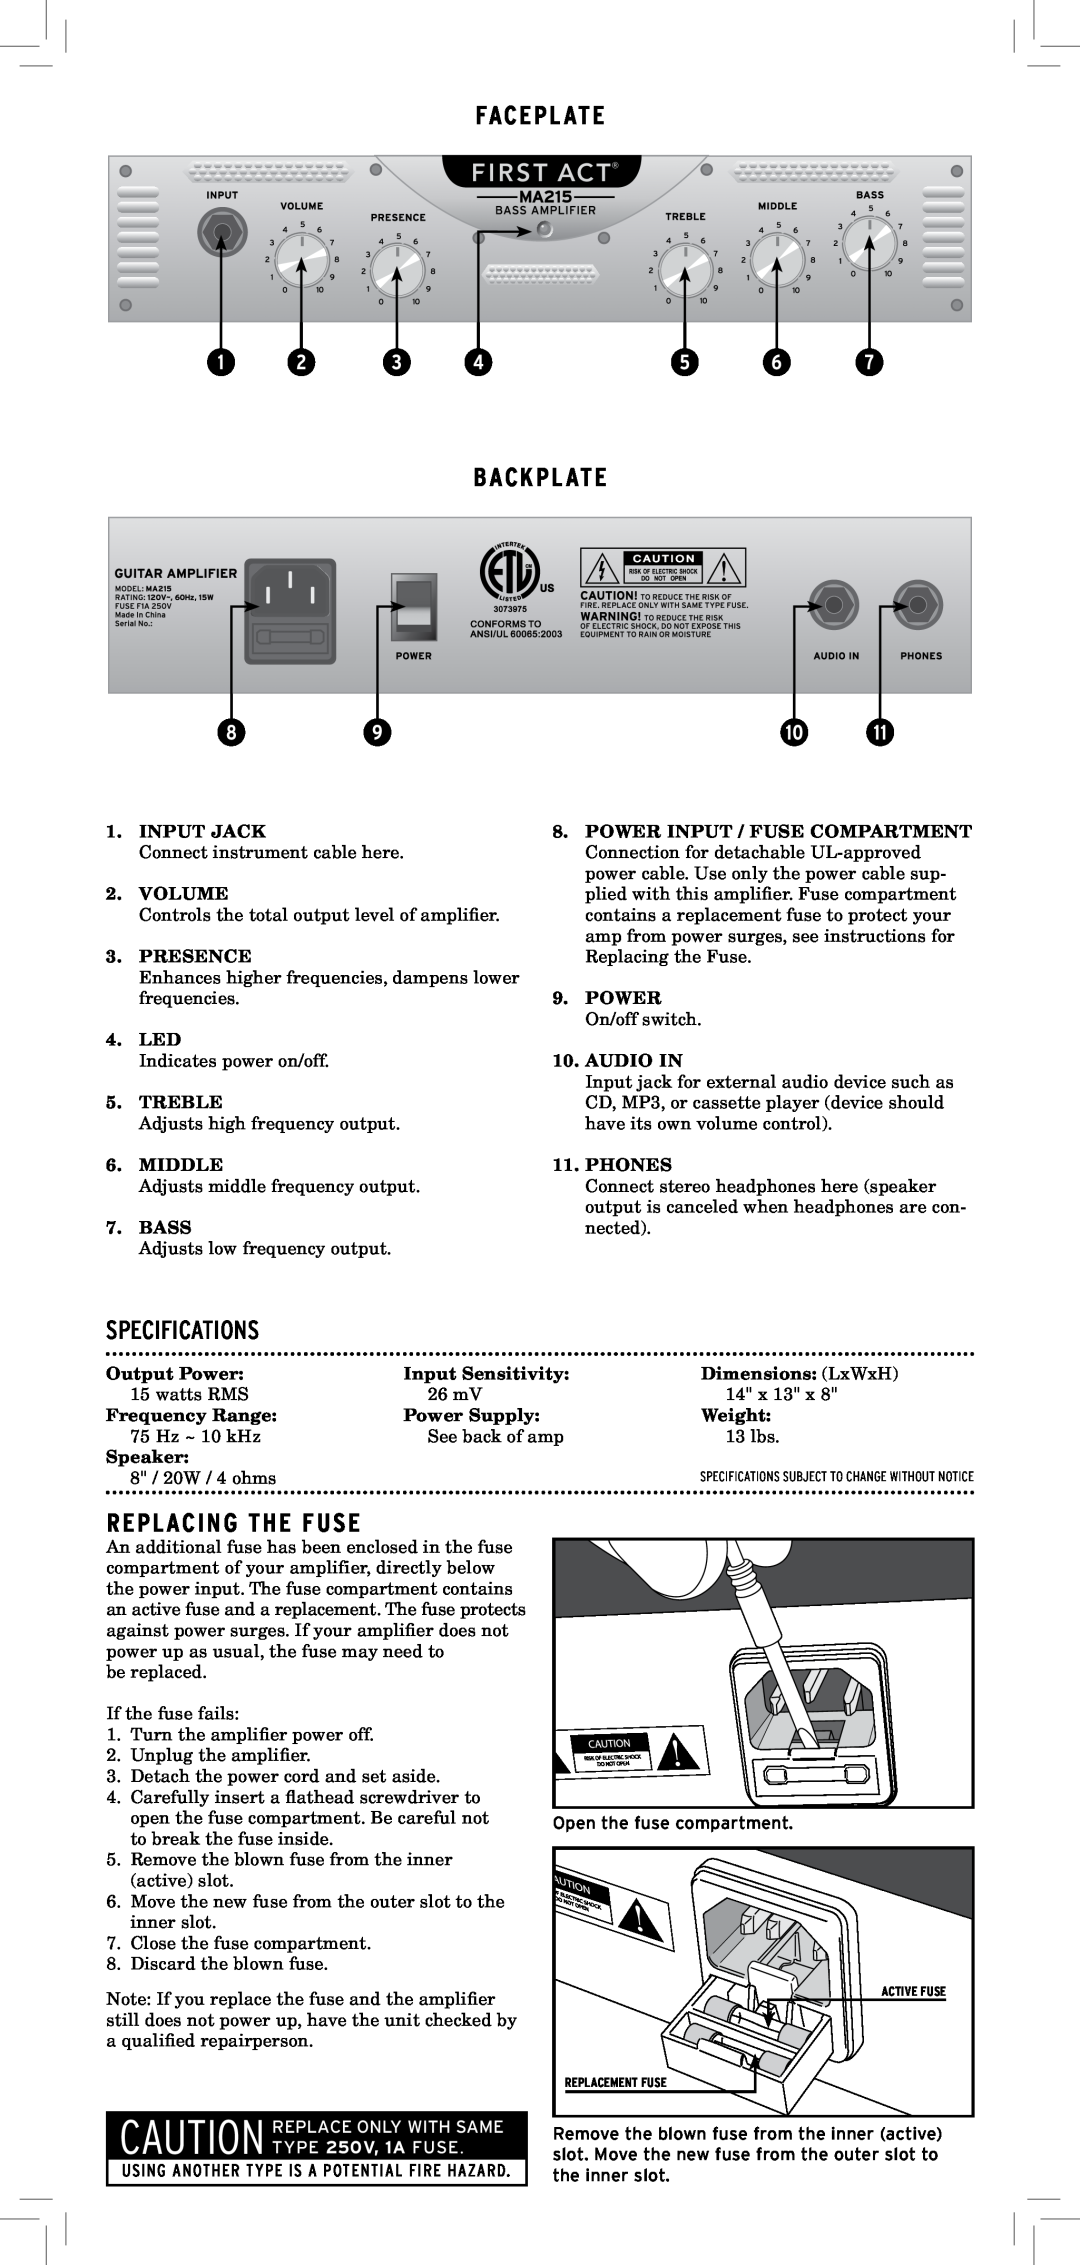 First Act MA215 important safety instructions Faceplate, Backplate, Replacing The Fuse, Specifications 